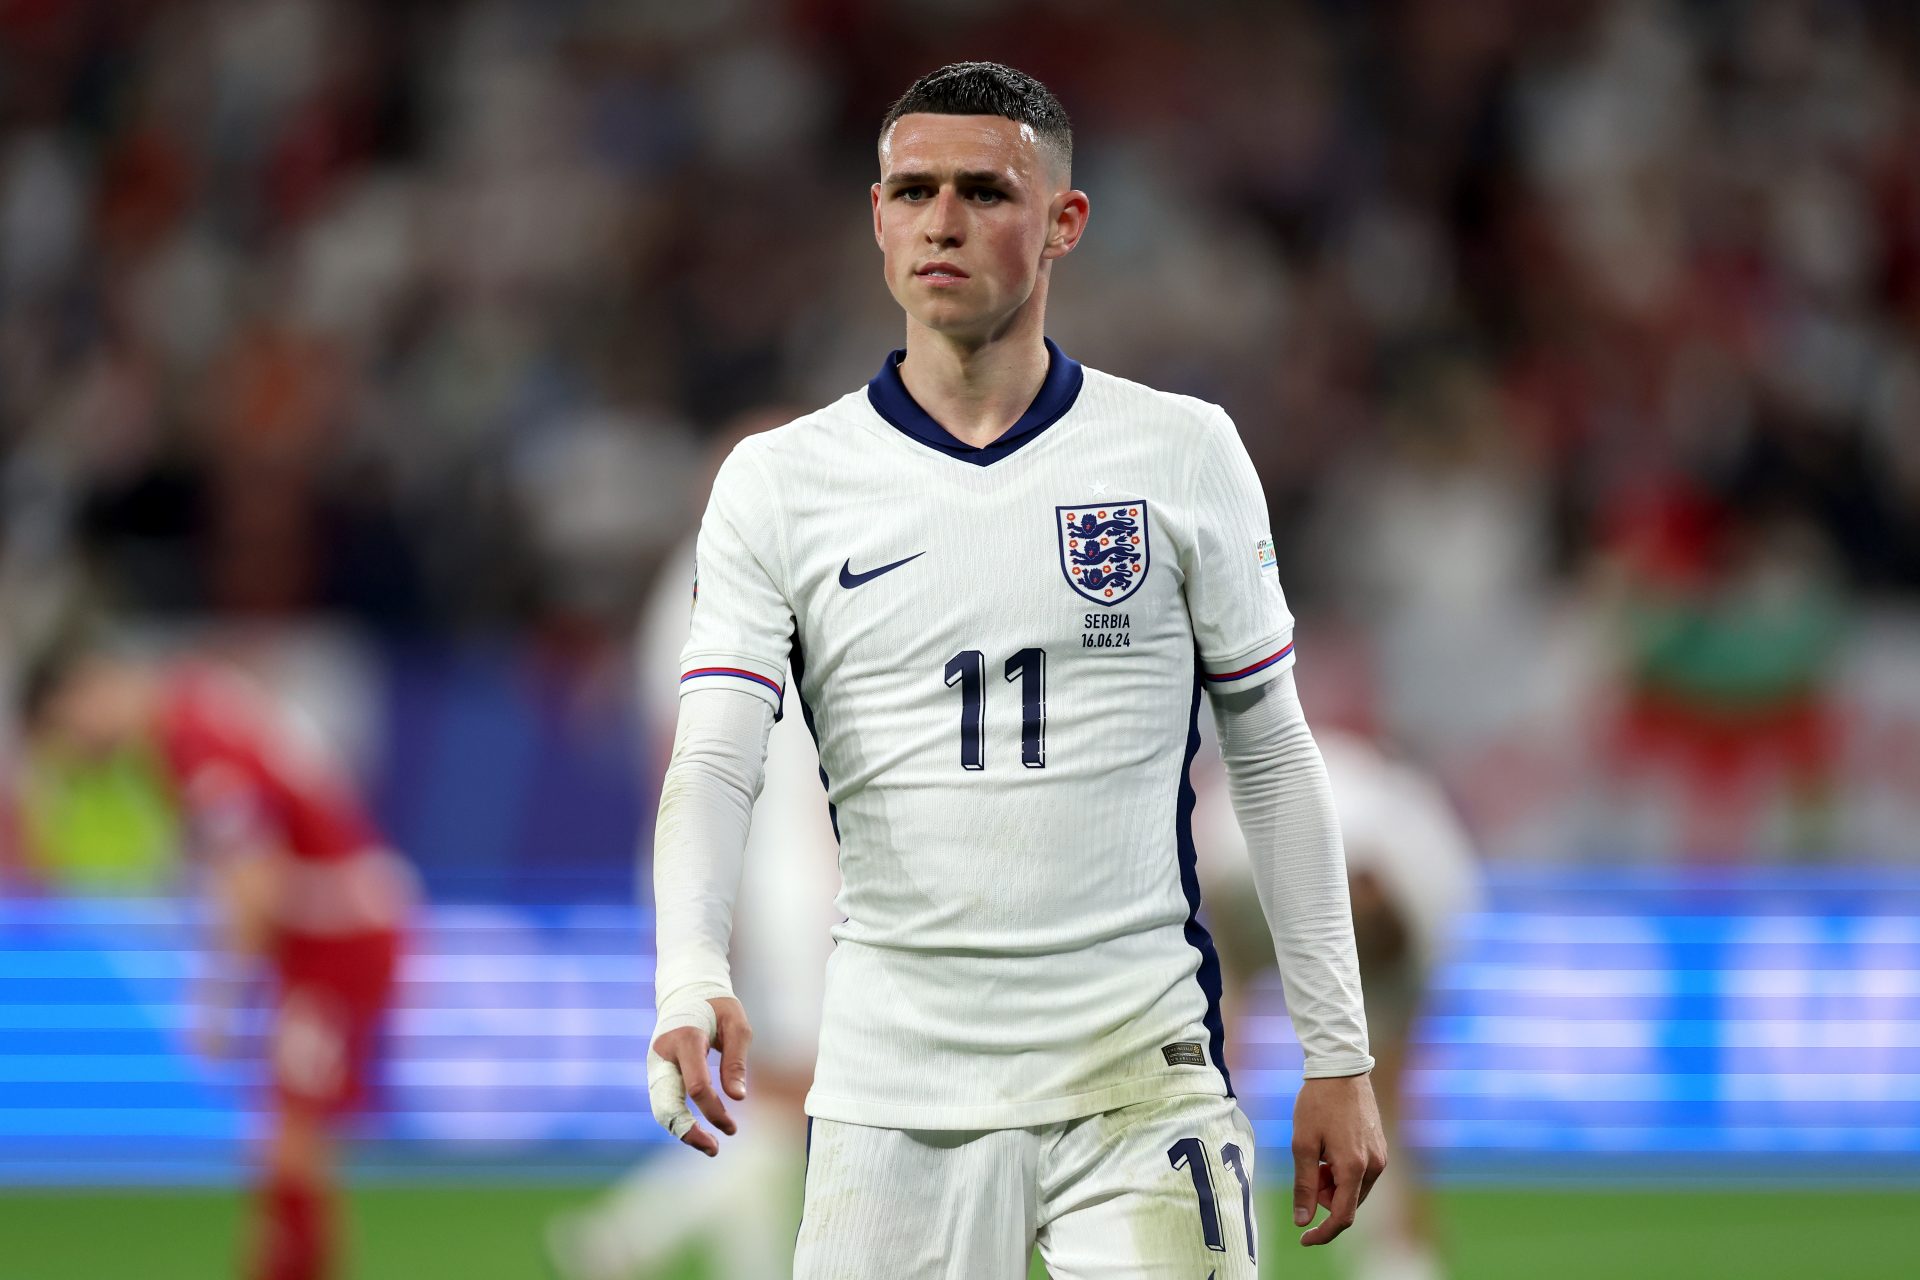 Phil Foden destroyed following England performance: 